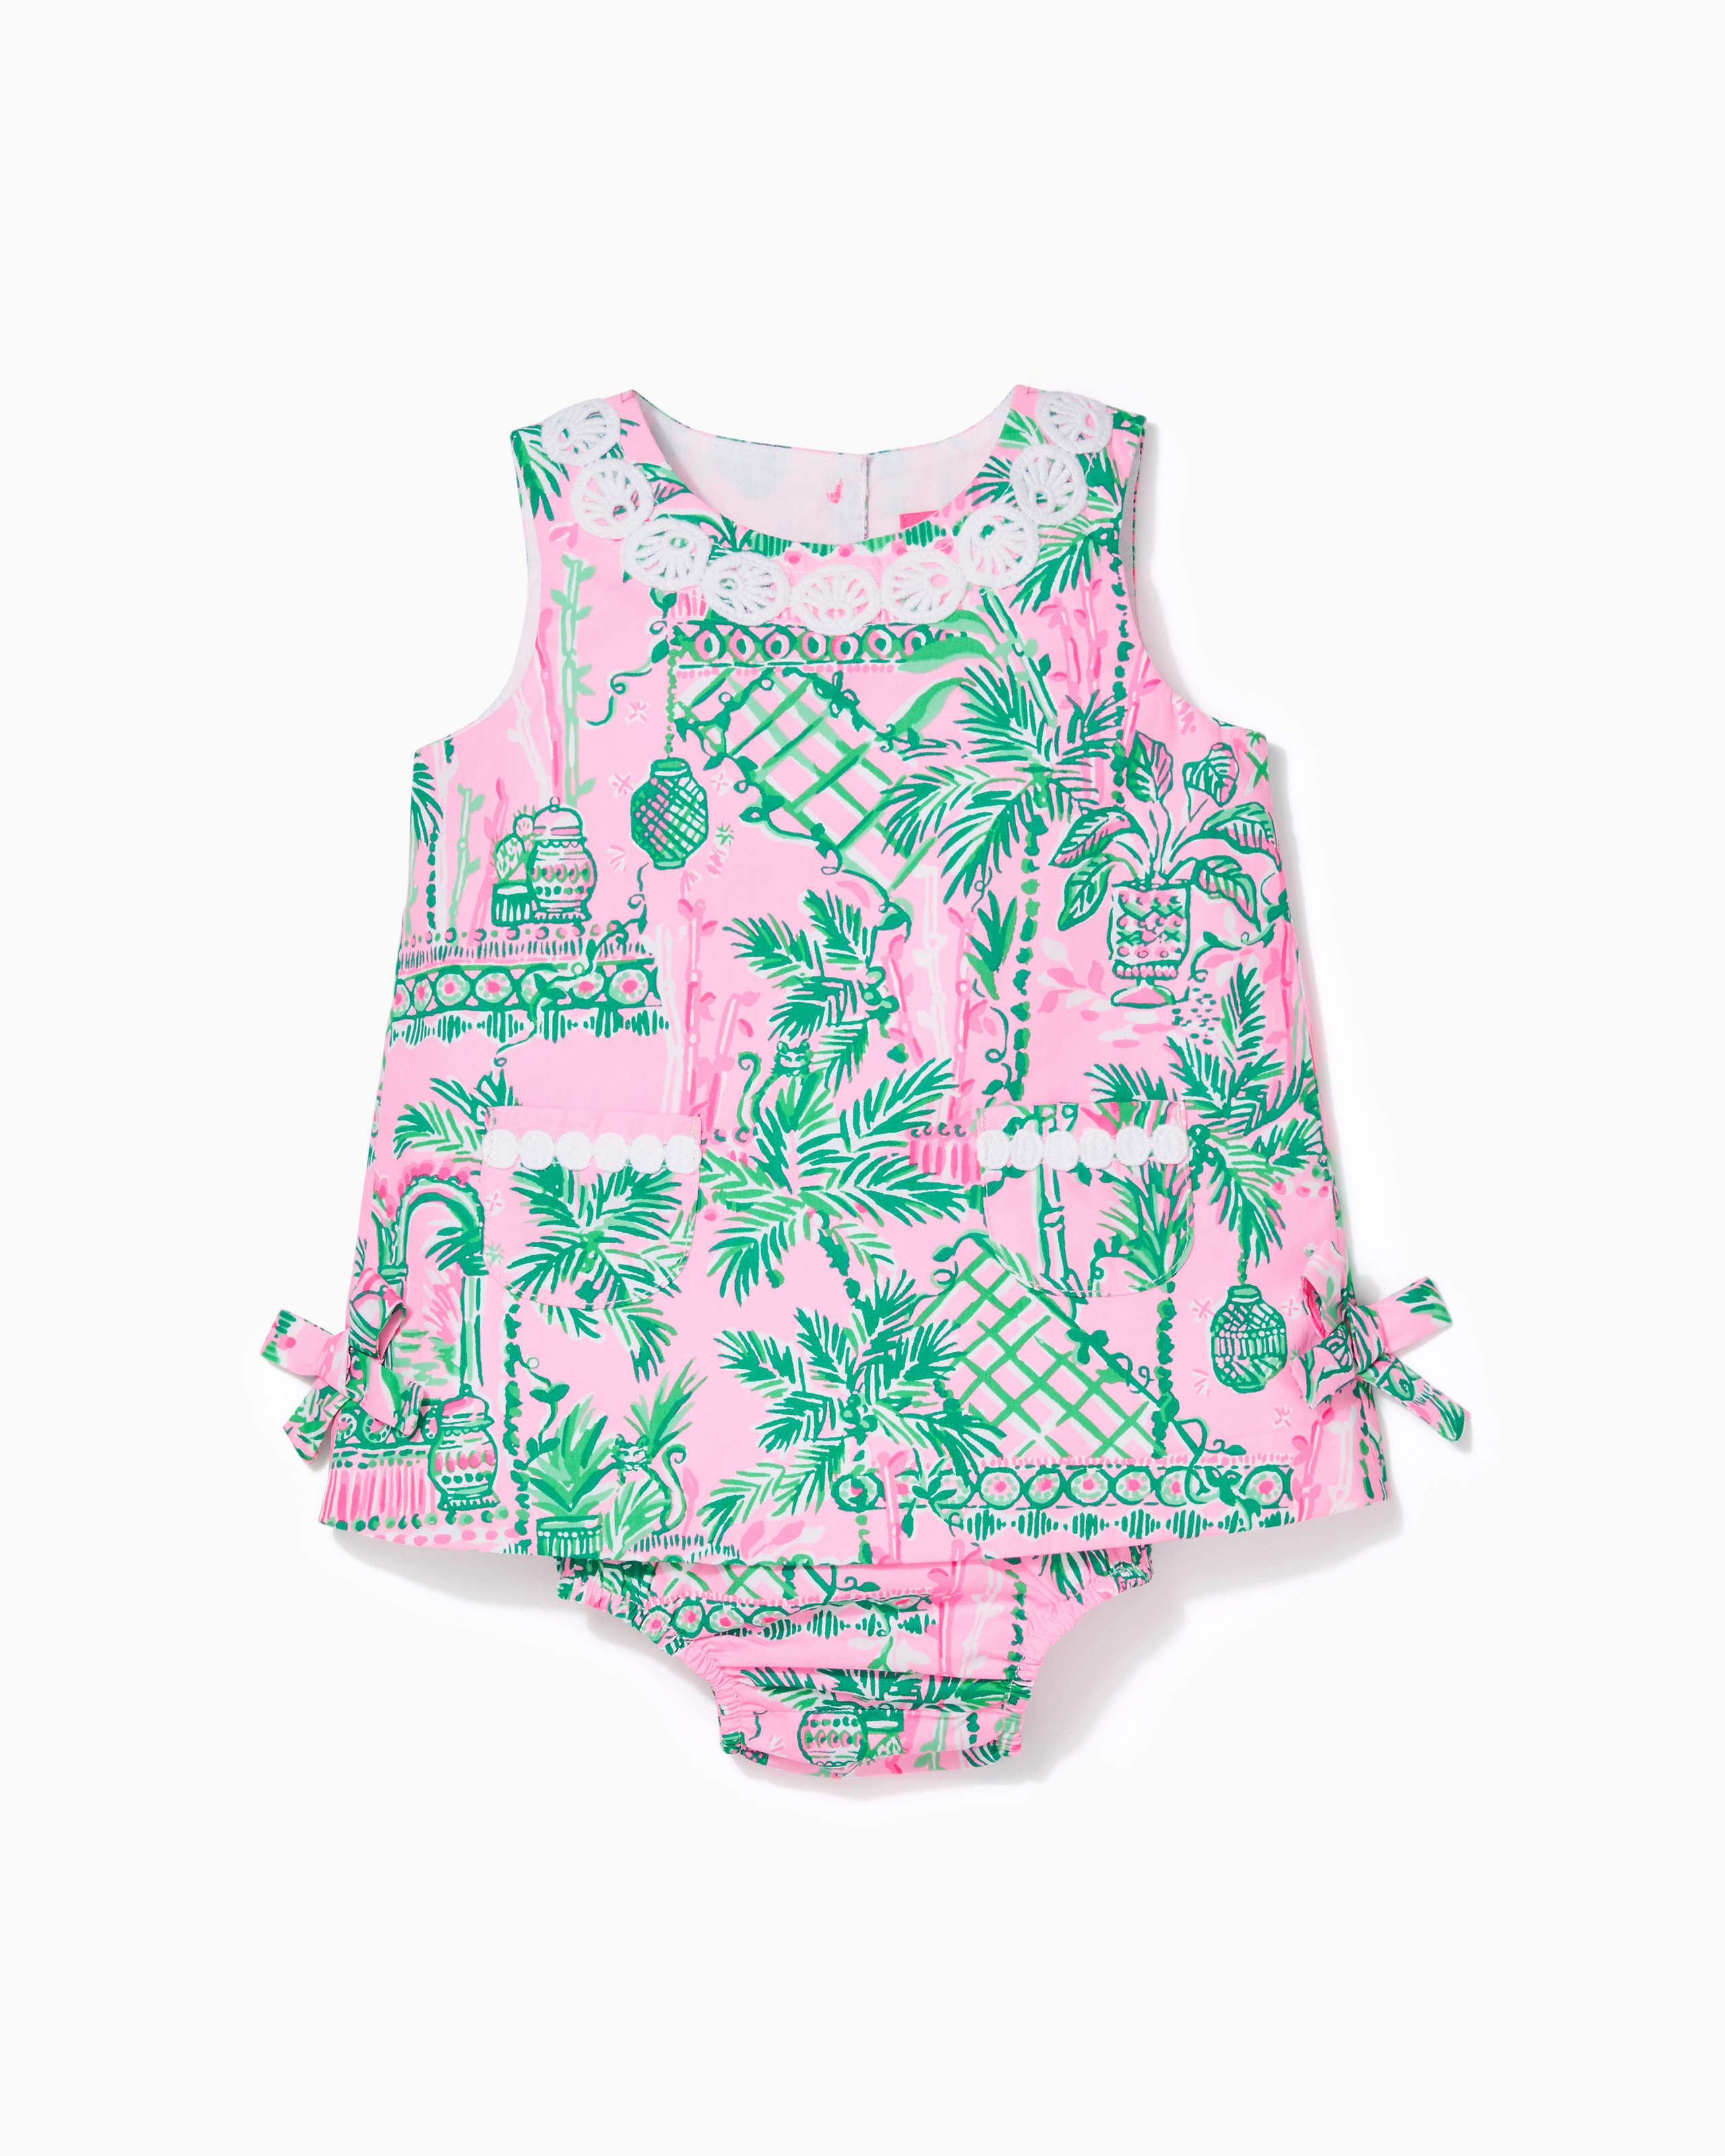 Baby Lilly Infant Shift Dress, Mandevilla Baby Always Worth It, large - Lilly Pulitzer Zoomed